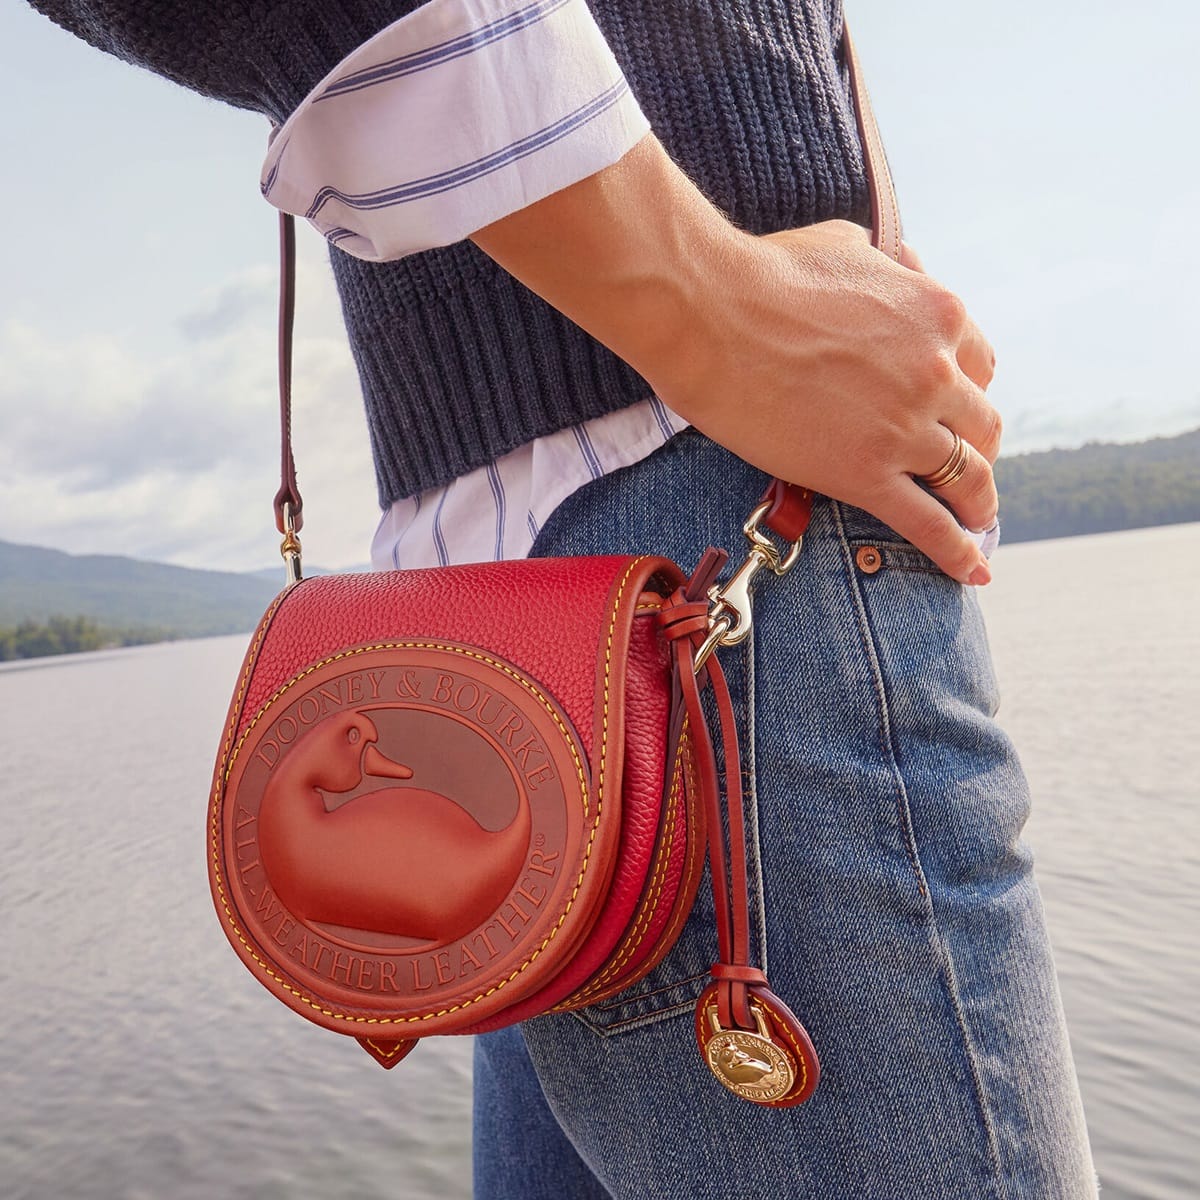 The "All Weather Leather" (AWL) was a defining characteristic of early Dooney & Bourke bags, and it was designed to repel water and resist the elements, much like a duck's feathers